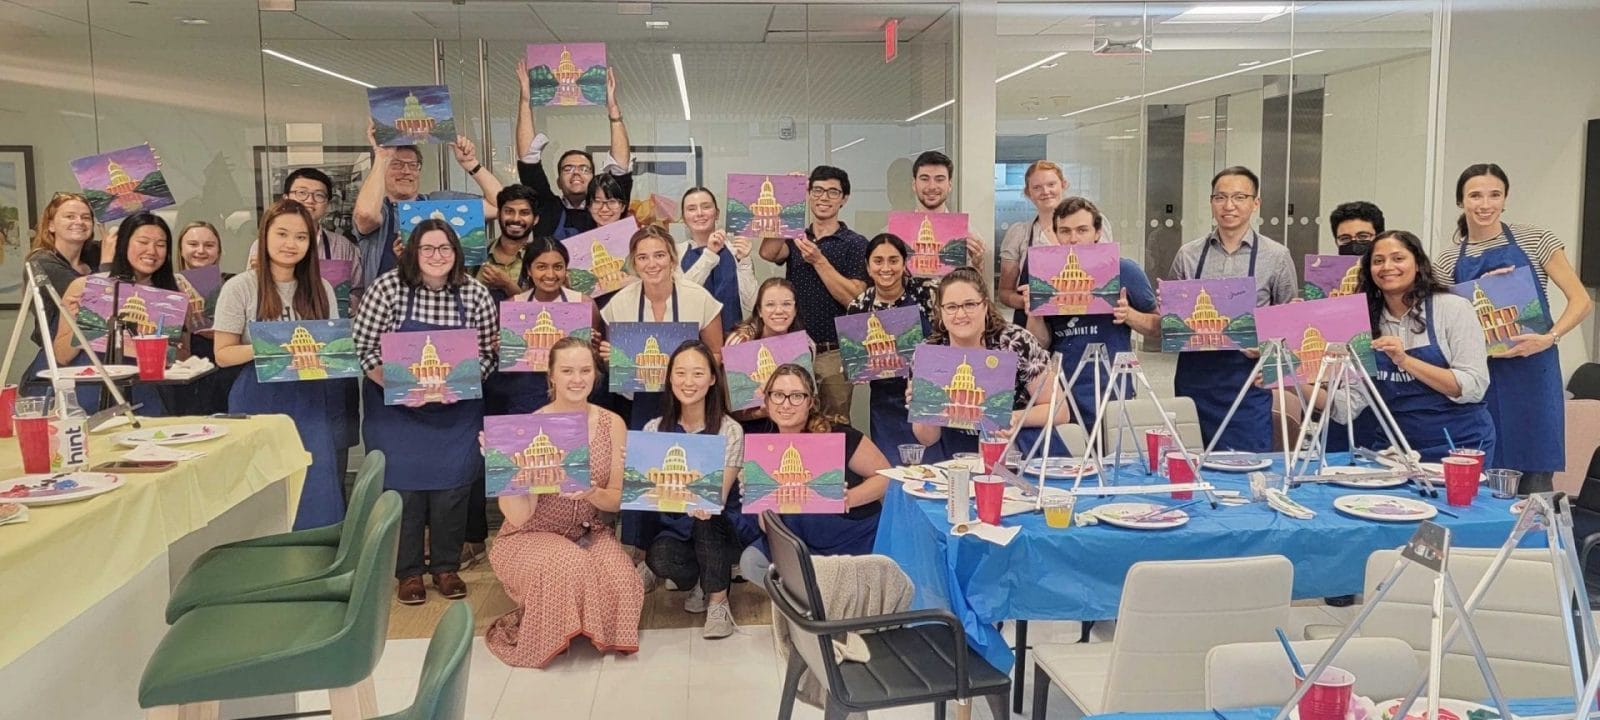 A group of people enjoying a paint and sip while showcasing their artwork in a Washington DC office.